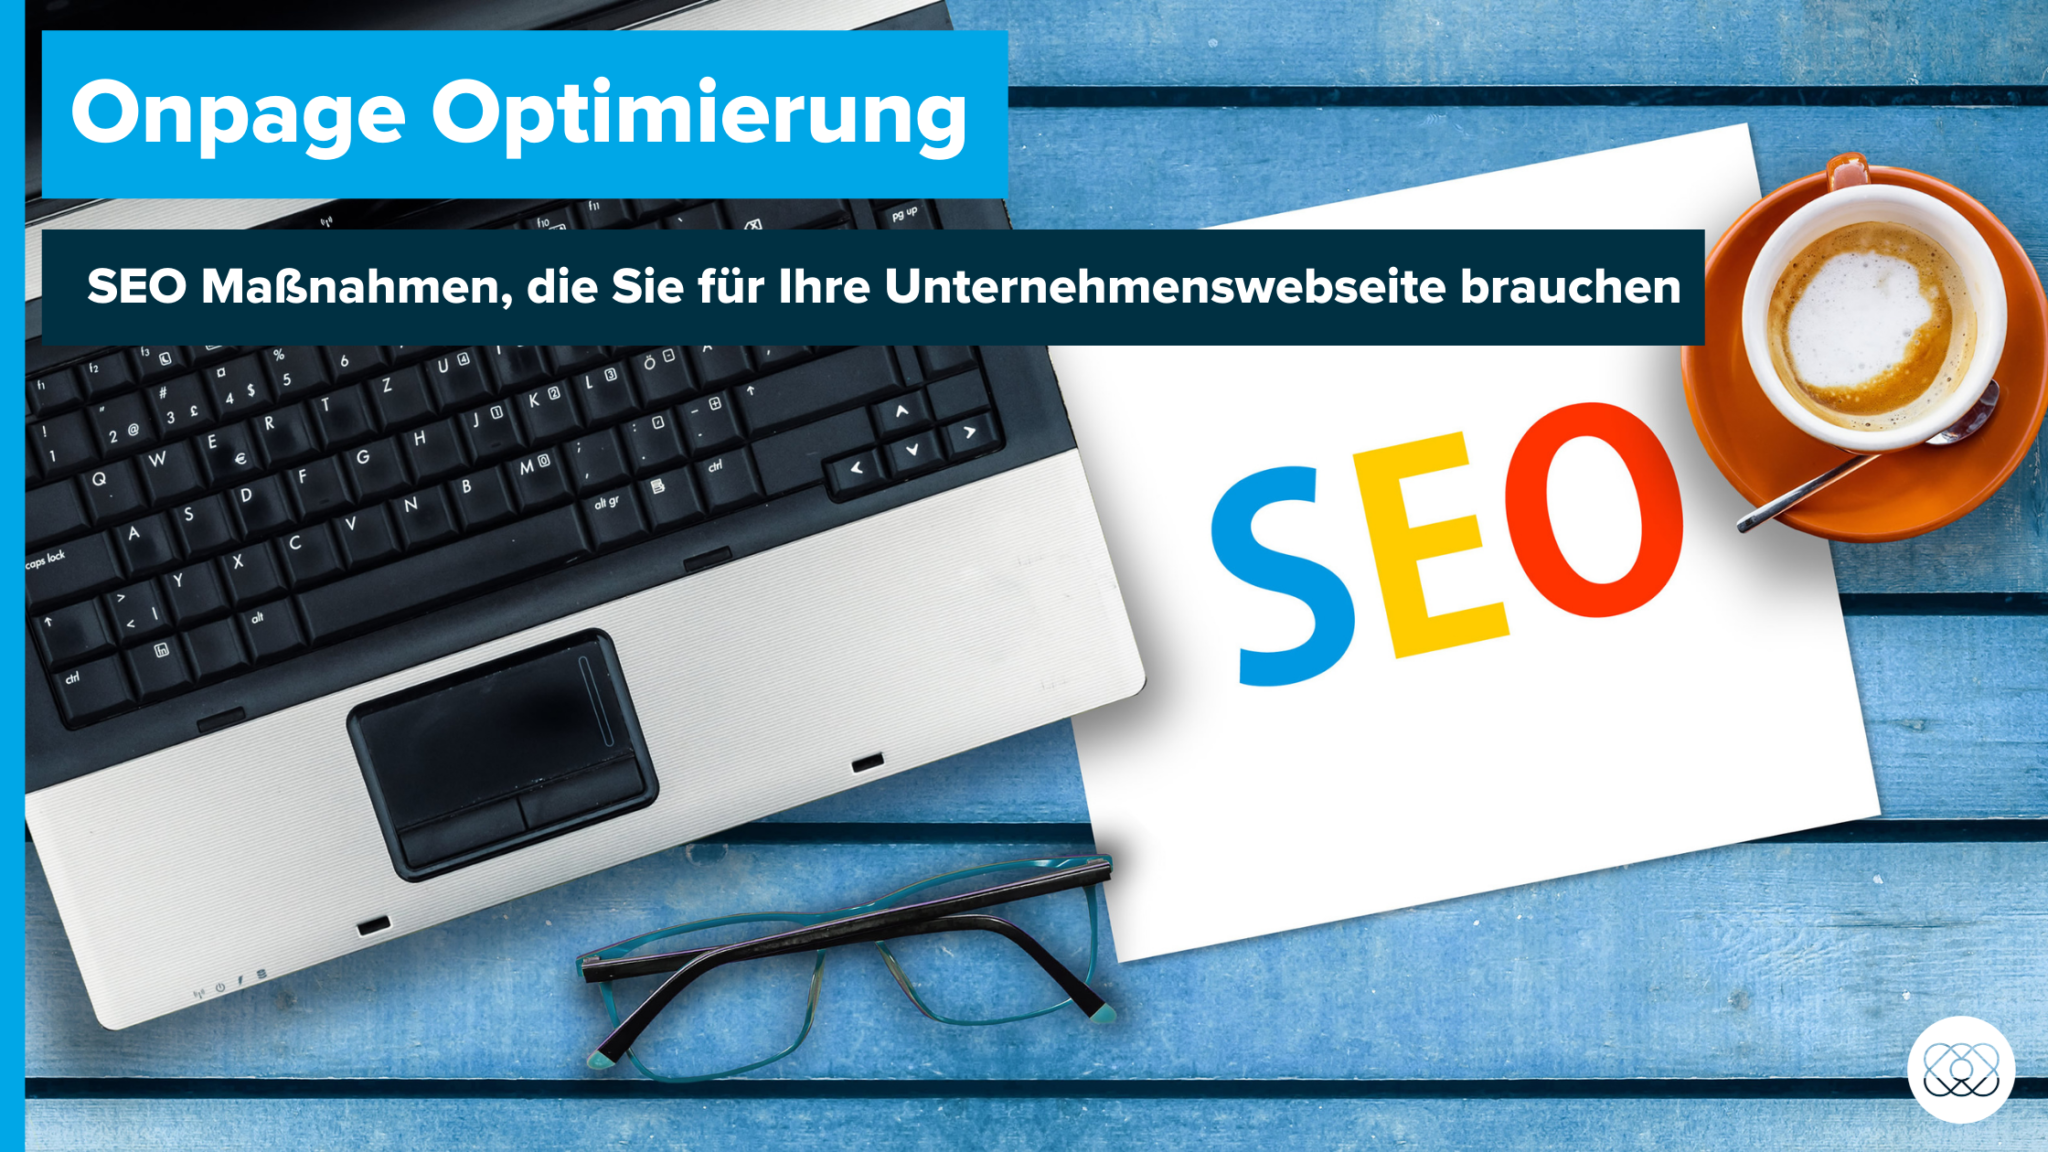 Onpage Optimierung